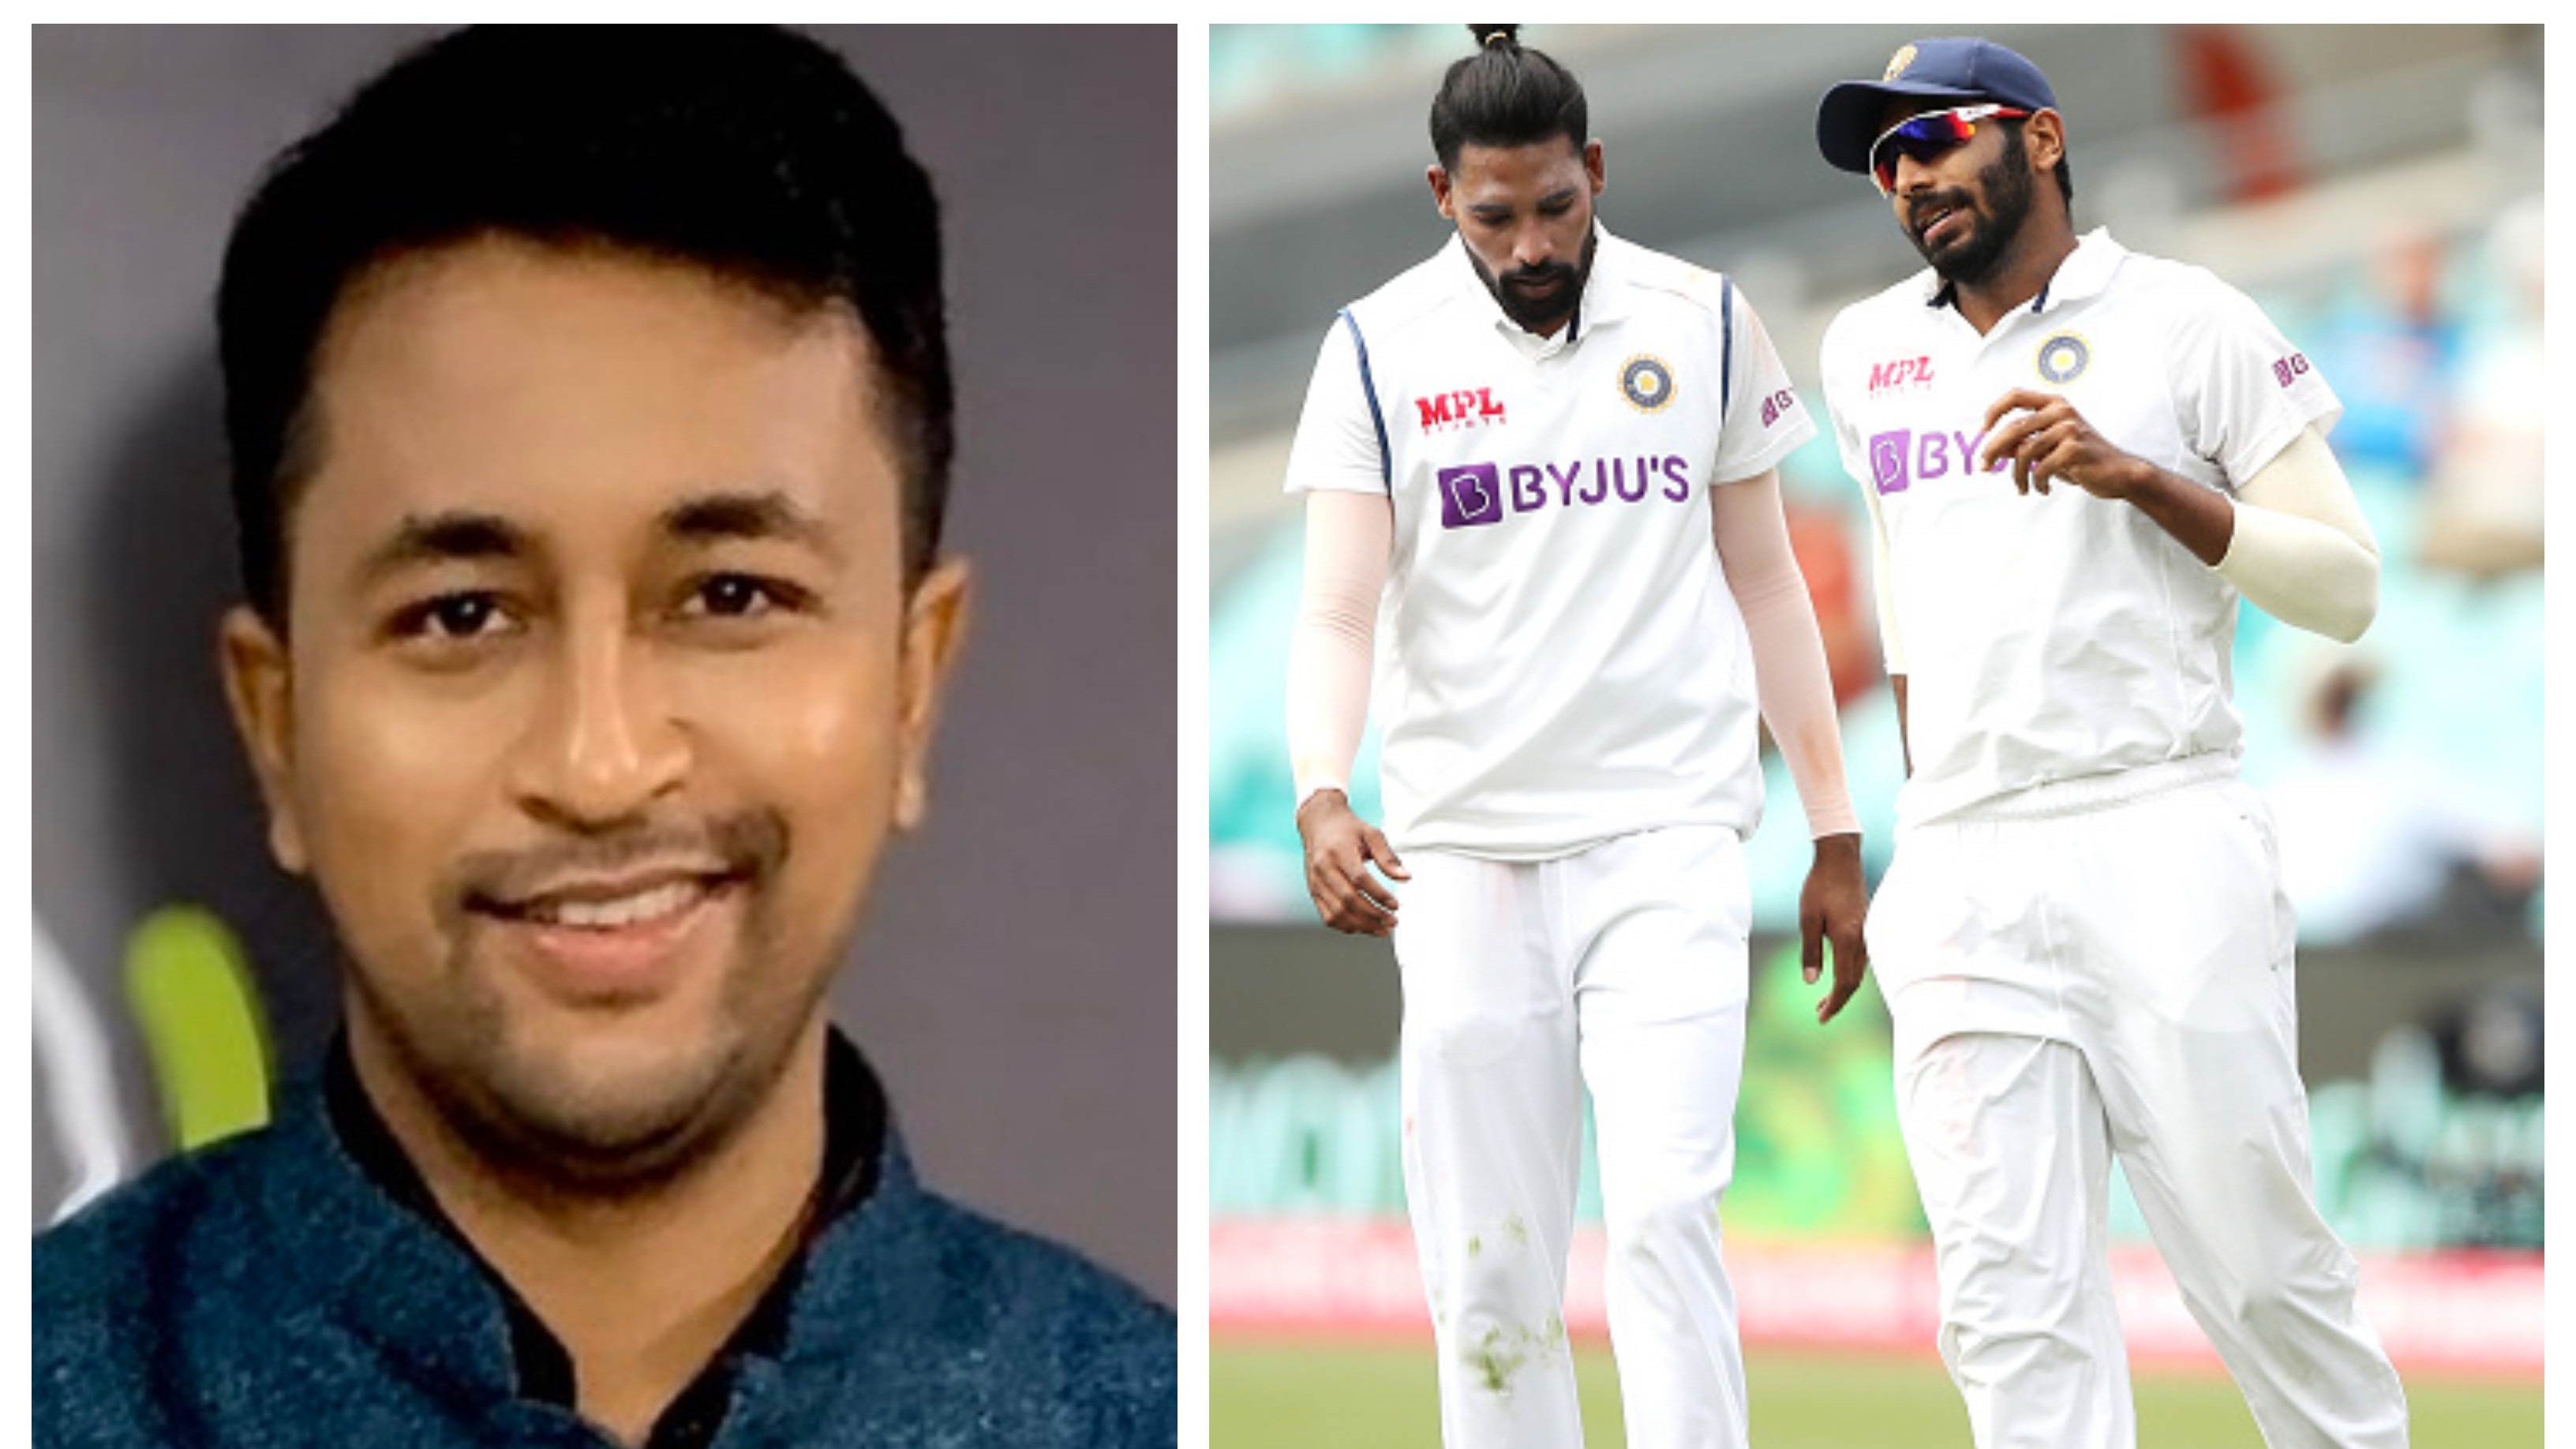 AUS v IND 2020-21: ‘BCCI should take up the issue with ICC’, Pragyan Ojha on racial abuse against Bumrah & Siraj